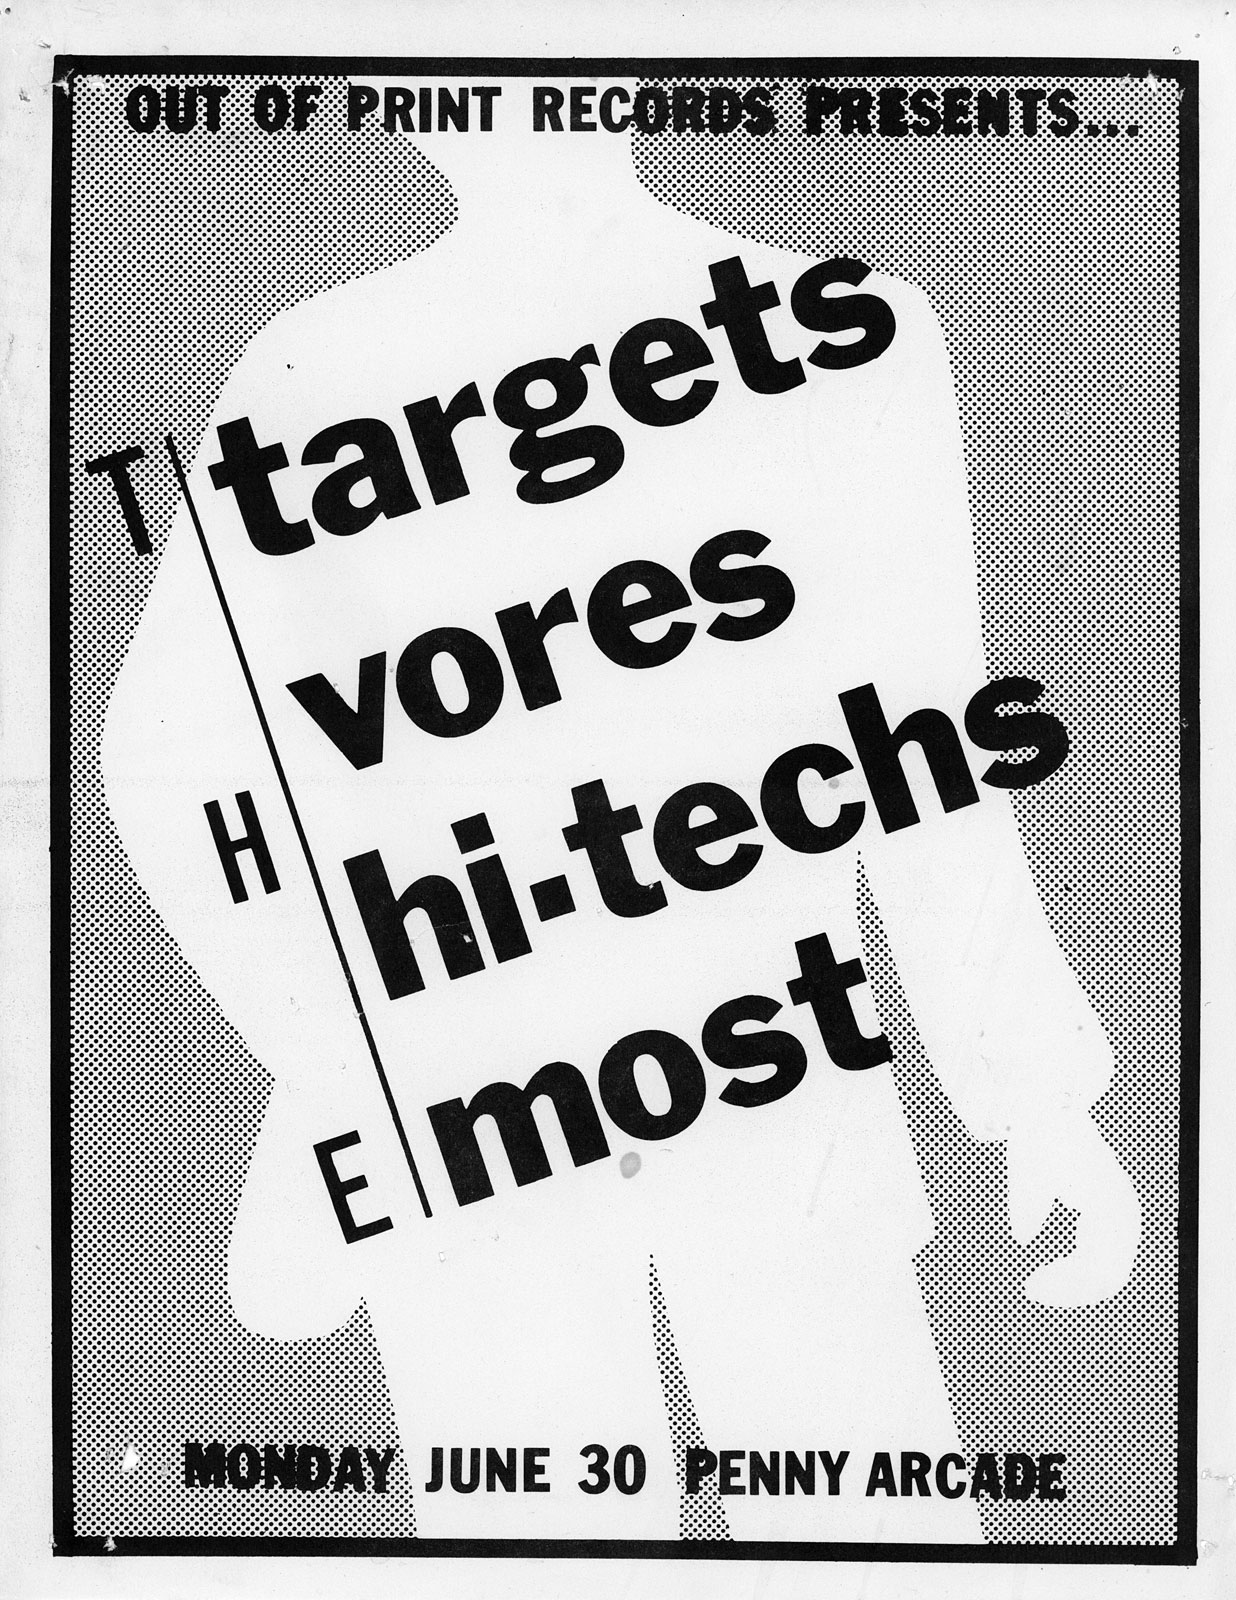 Poster for The Targets, Vores, Hi-Techs_and The Most at Penny Arcade in Rochester, New York 06.30.1980